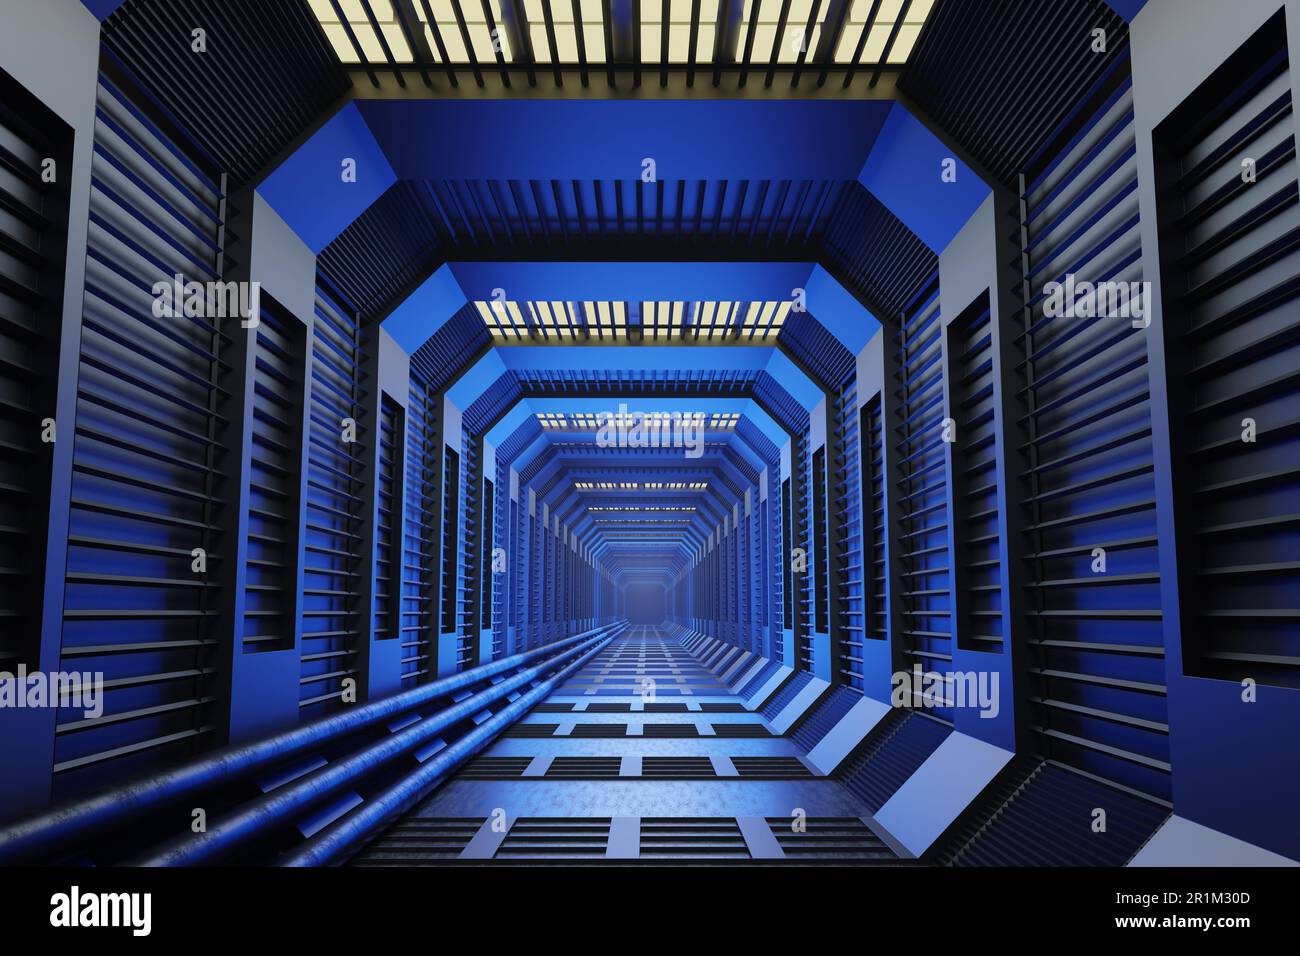 Sci-fi metallic tunnel illuminated by blue and yellow lights. Illustration as a design element for web design backgrounds and slide show wallpapers Stock Photo